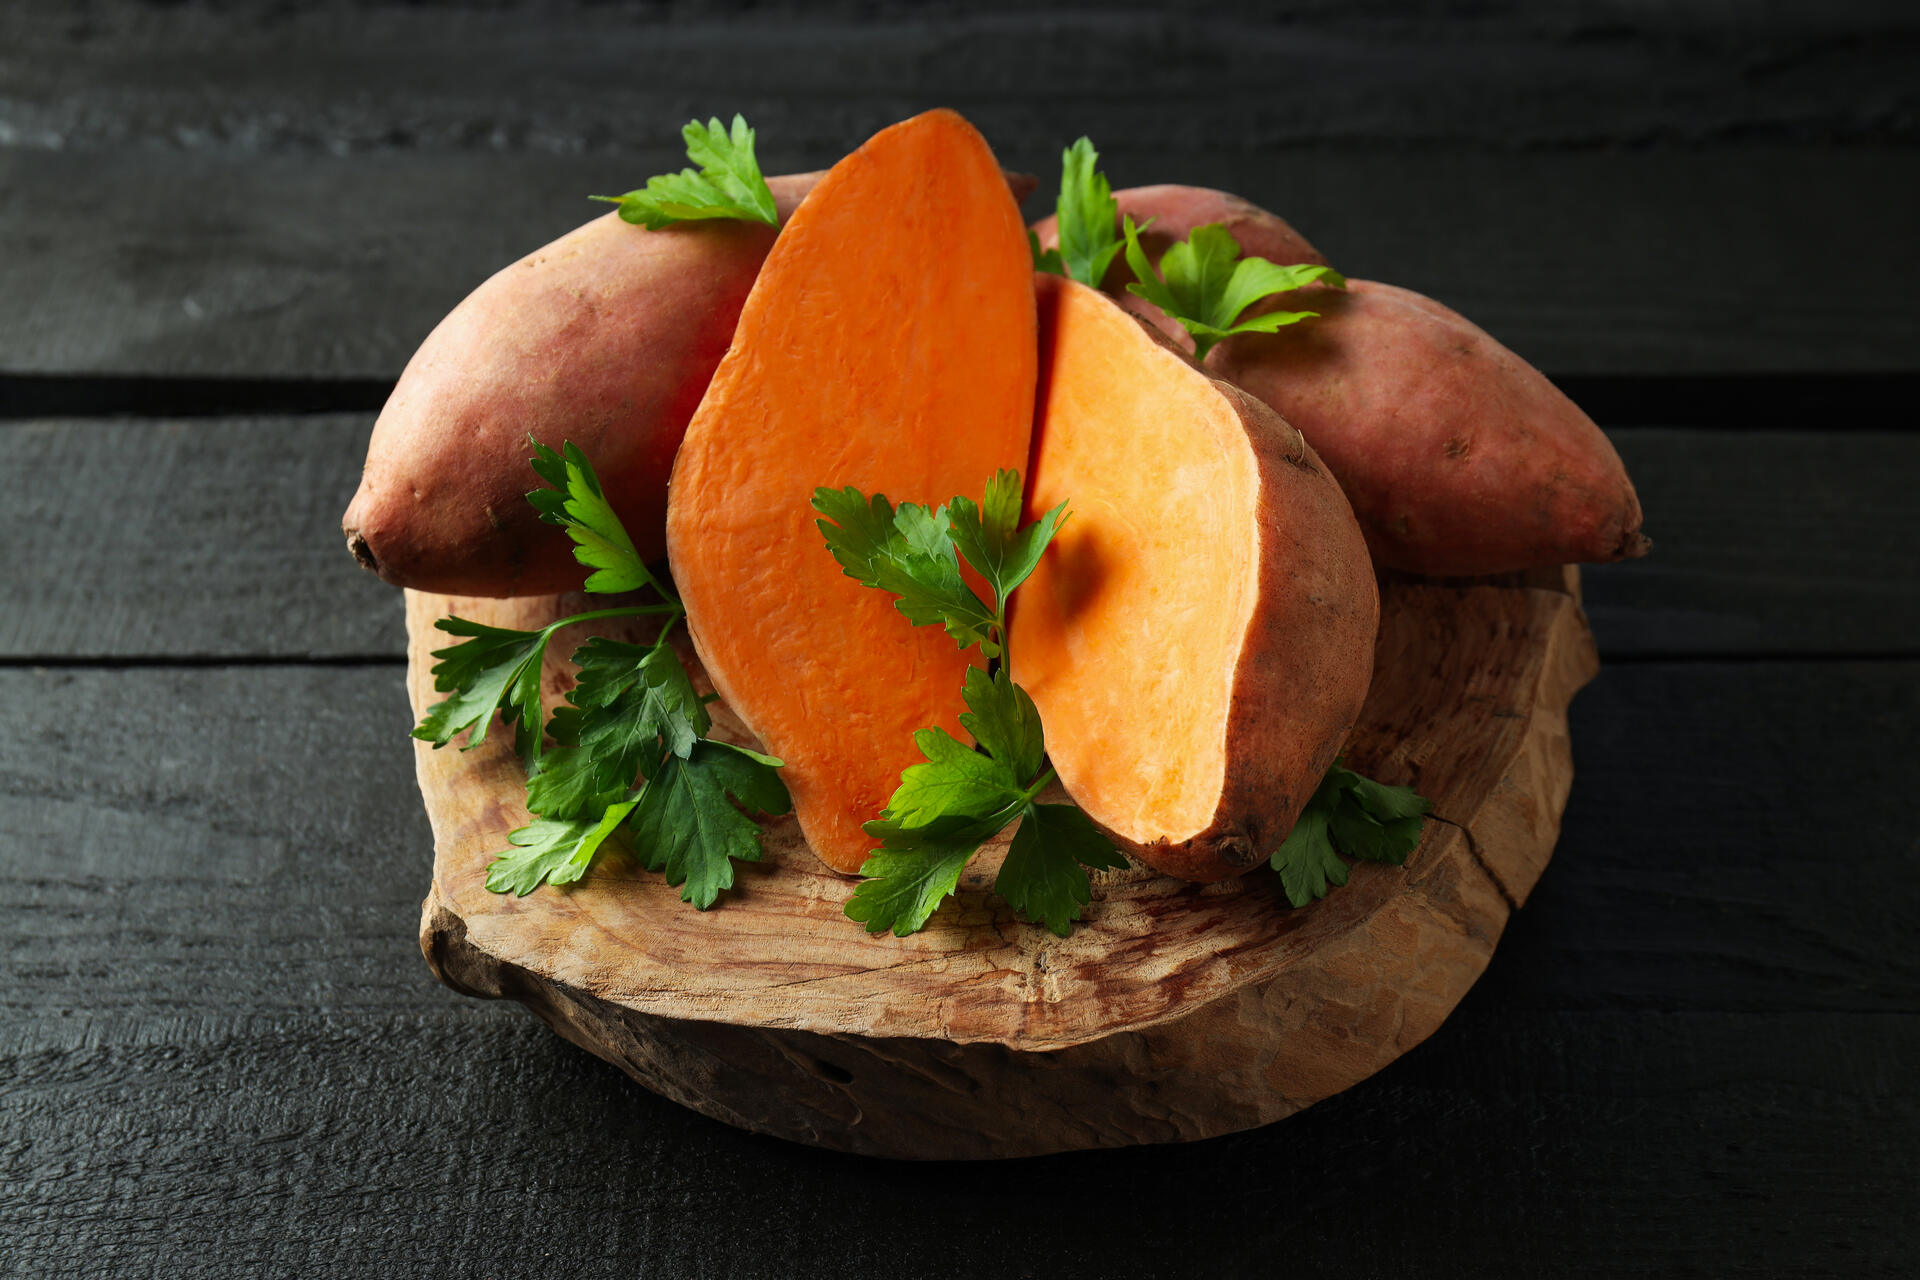 A plate of sweet potatoes on a wooden table